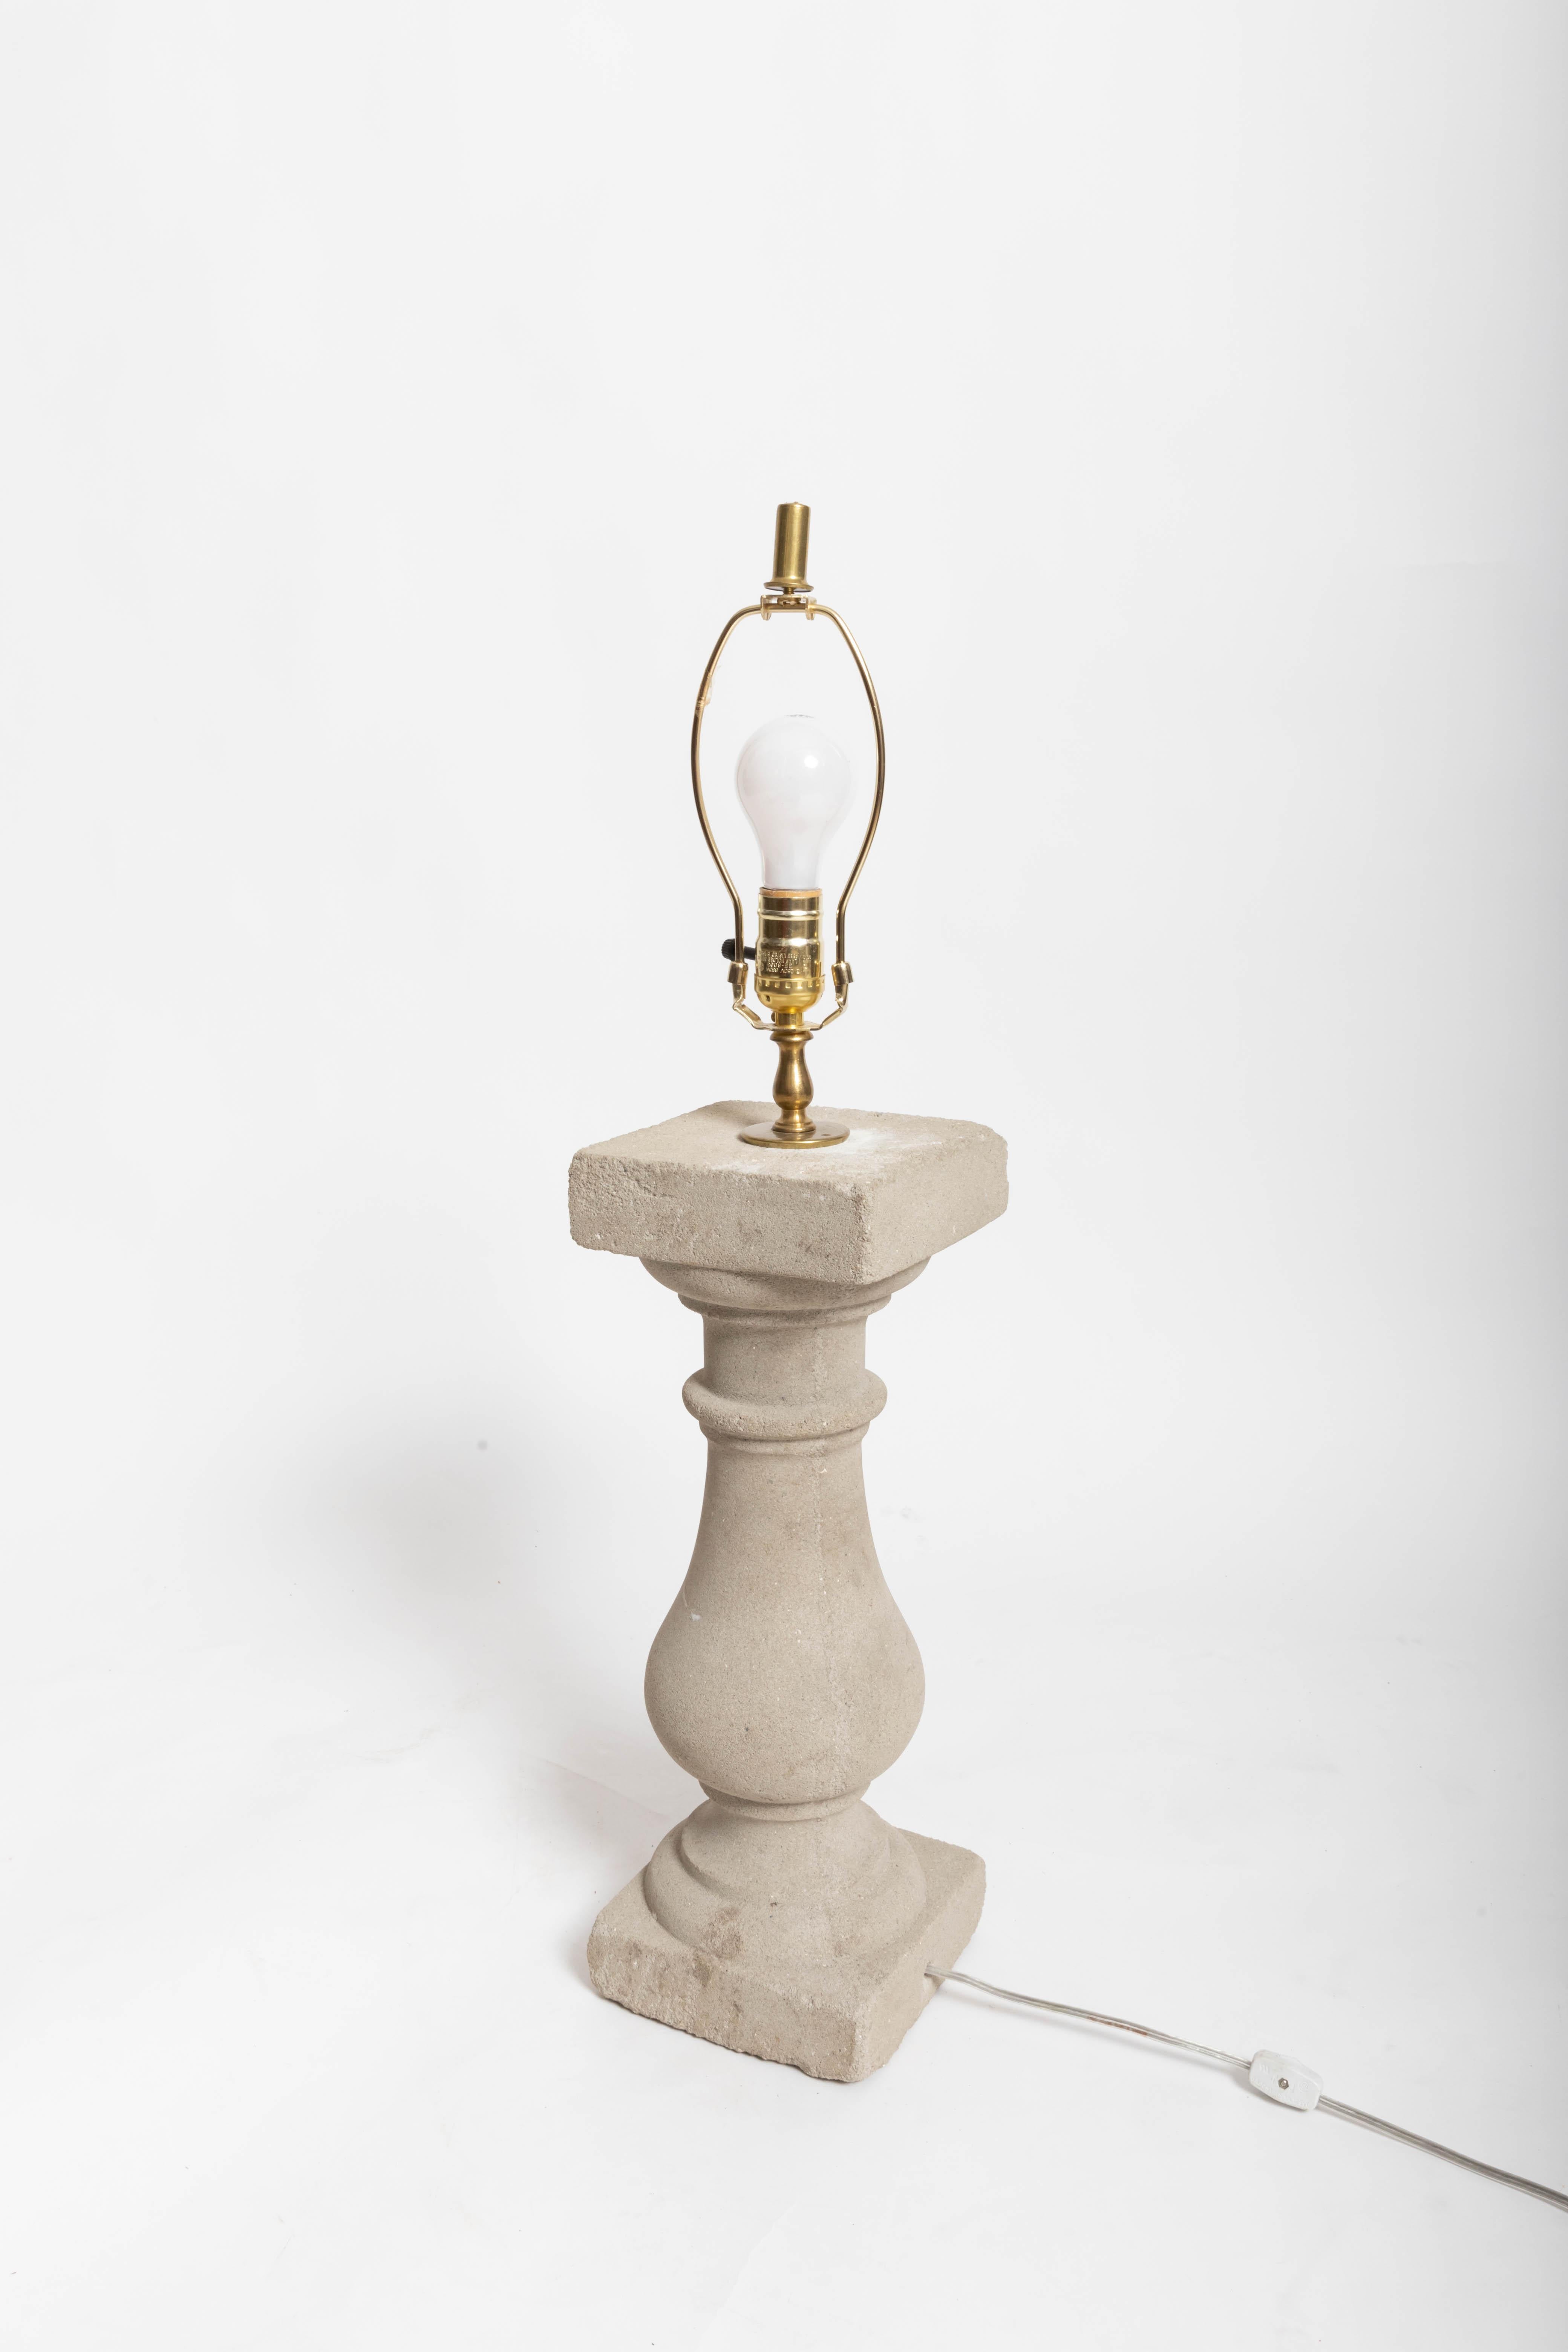 Stone Balustrade Lamp In Good Condition For Sale In East Hampton, NY